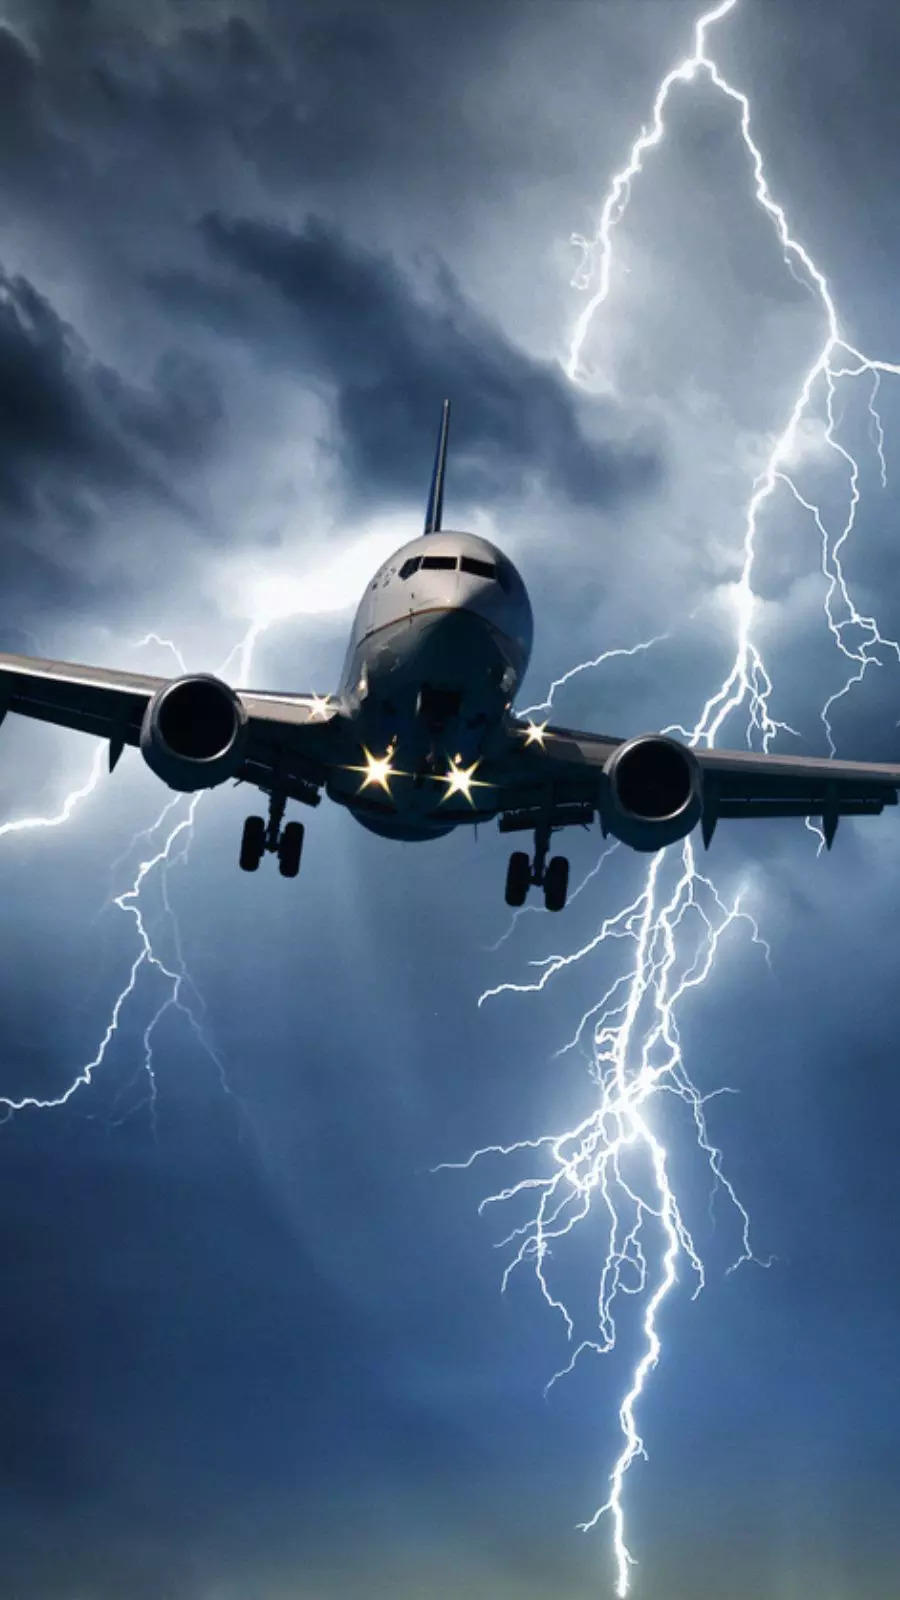 Safety tips to follow during an airplane turbulence 